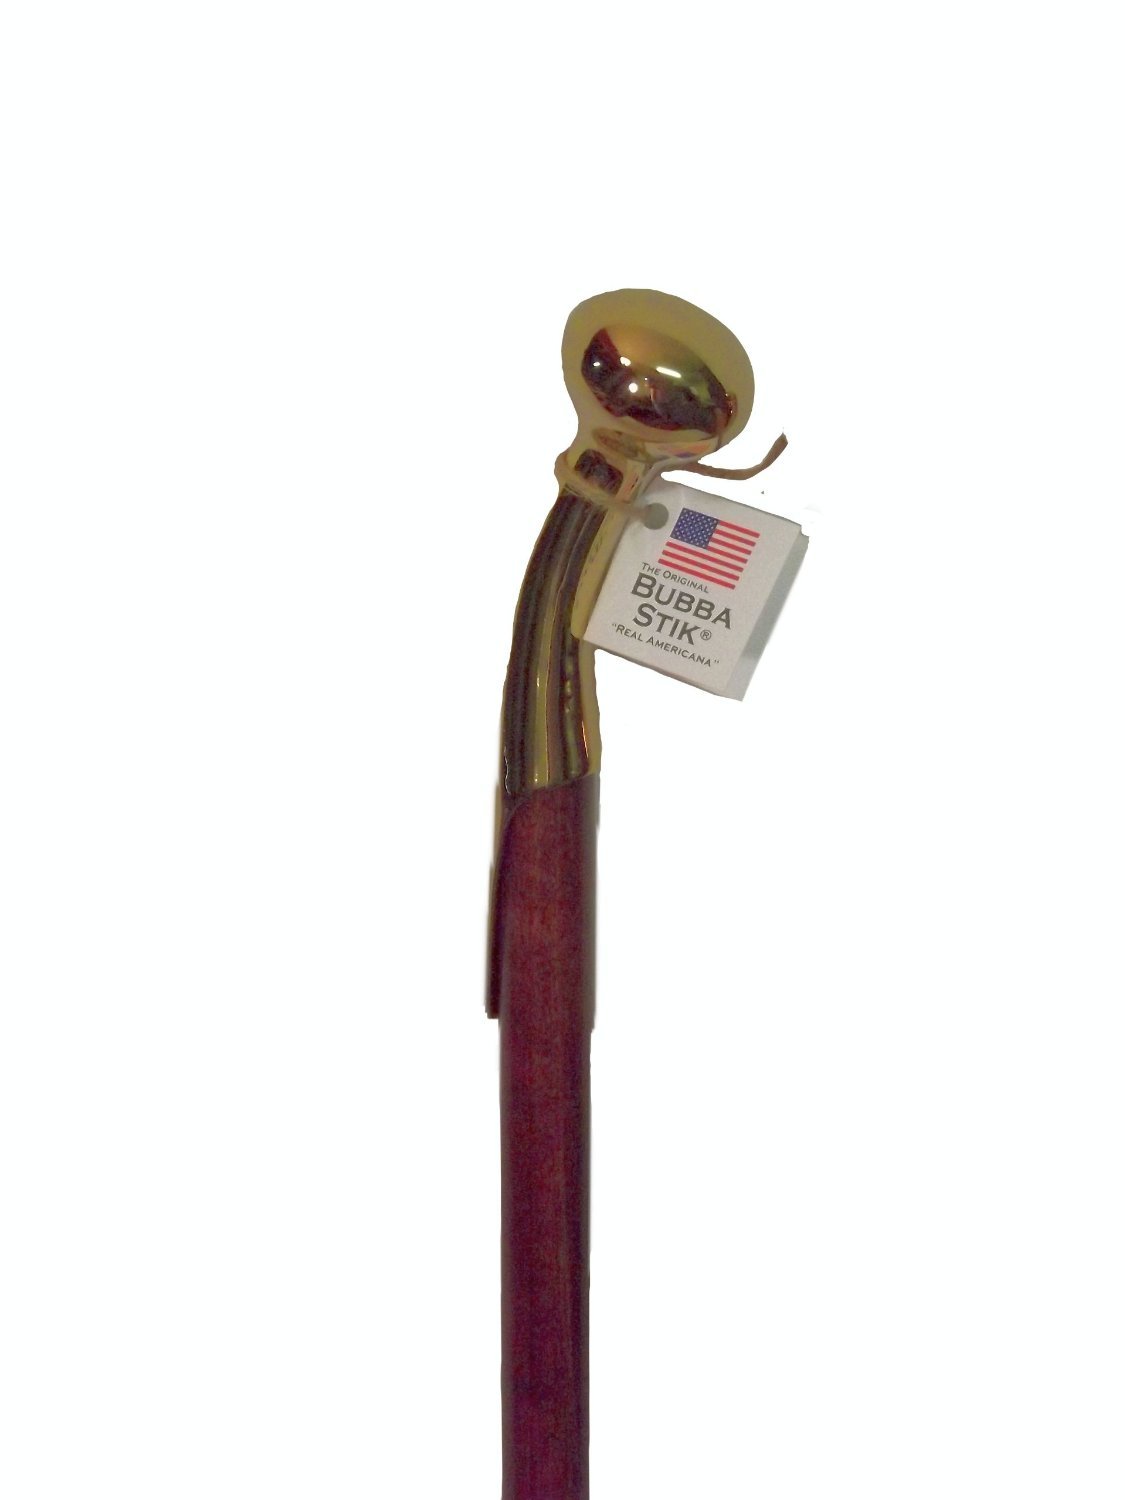 Bubba Stik Walking Cane Stained Tennessee Hardwood with Brass Hame Tip Handle 36 Inches - Walking Stick for Elderly Men and Women